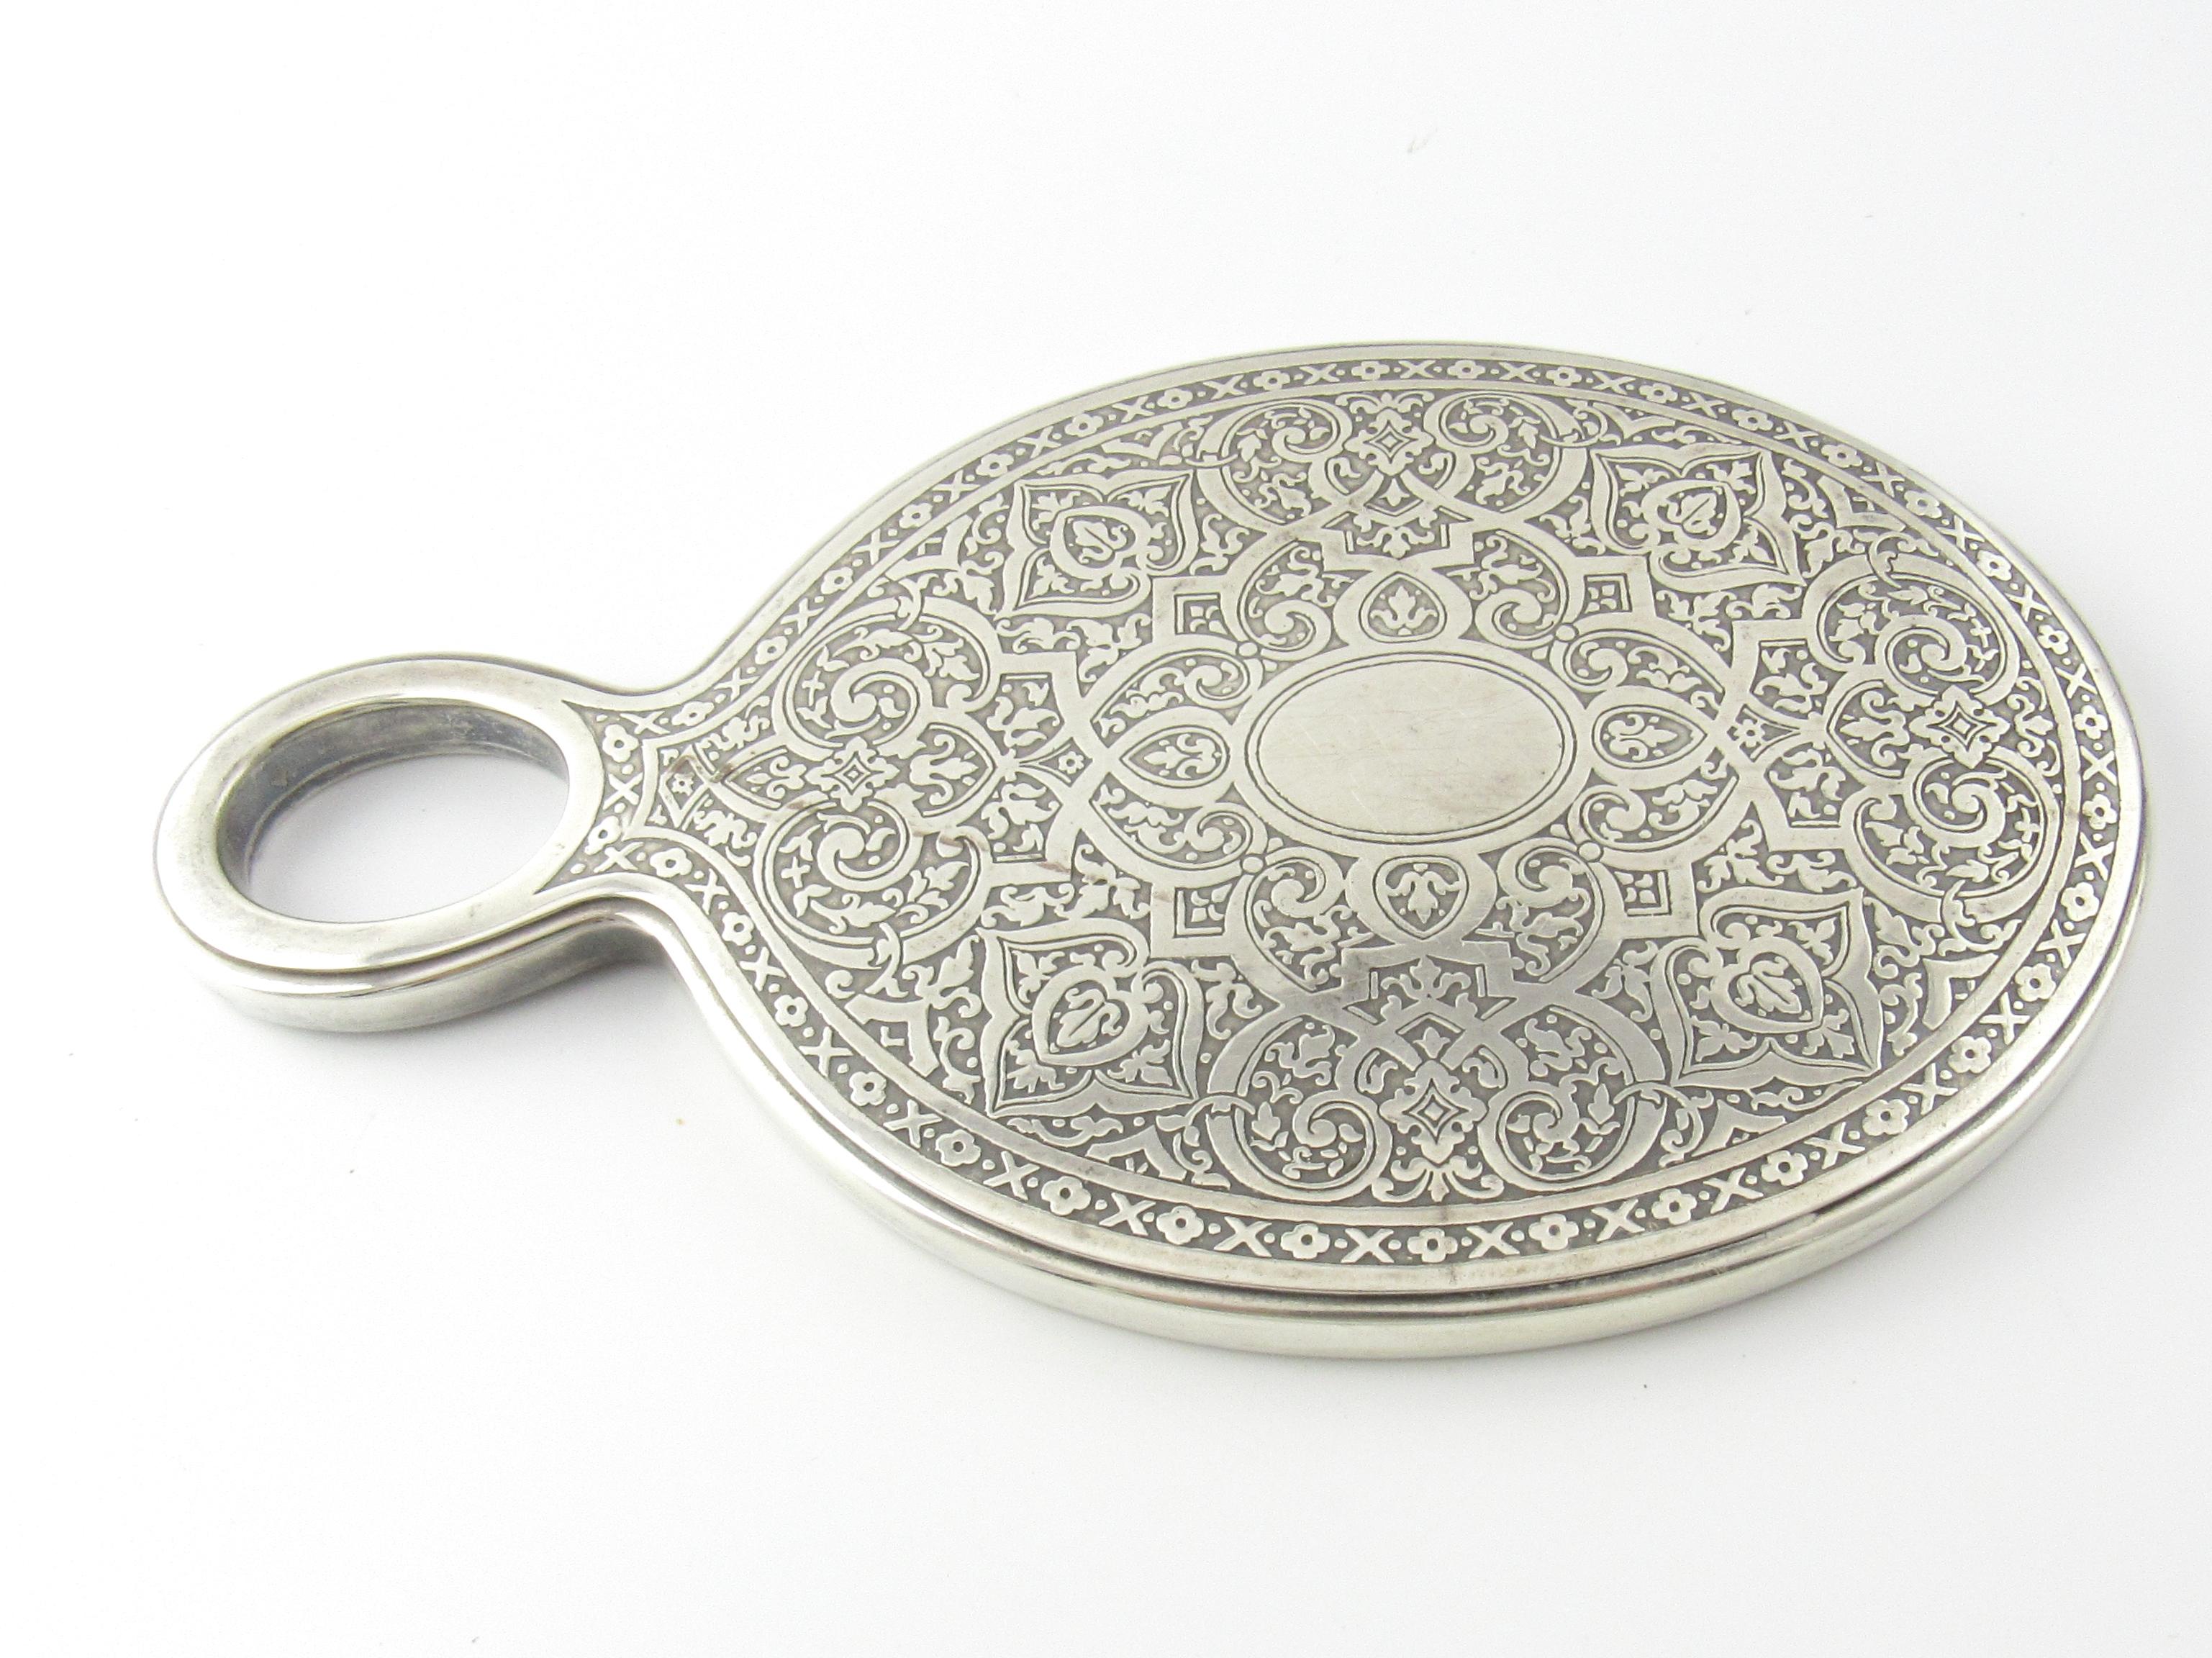 Tiffany & Co Sterling Silver Hand Held Mirror Early 1900's

This is a gorgeous sterling silver hand held mirror with beautiful detail from the early 1900's designed by Tiffany & Co.

Measurement: Measures approx. 8 inches in length and 4 and 3/4